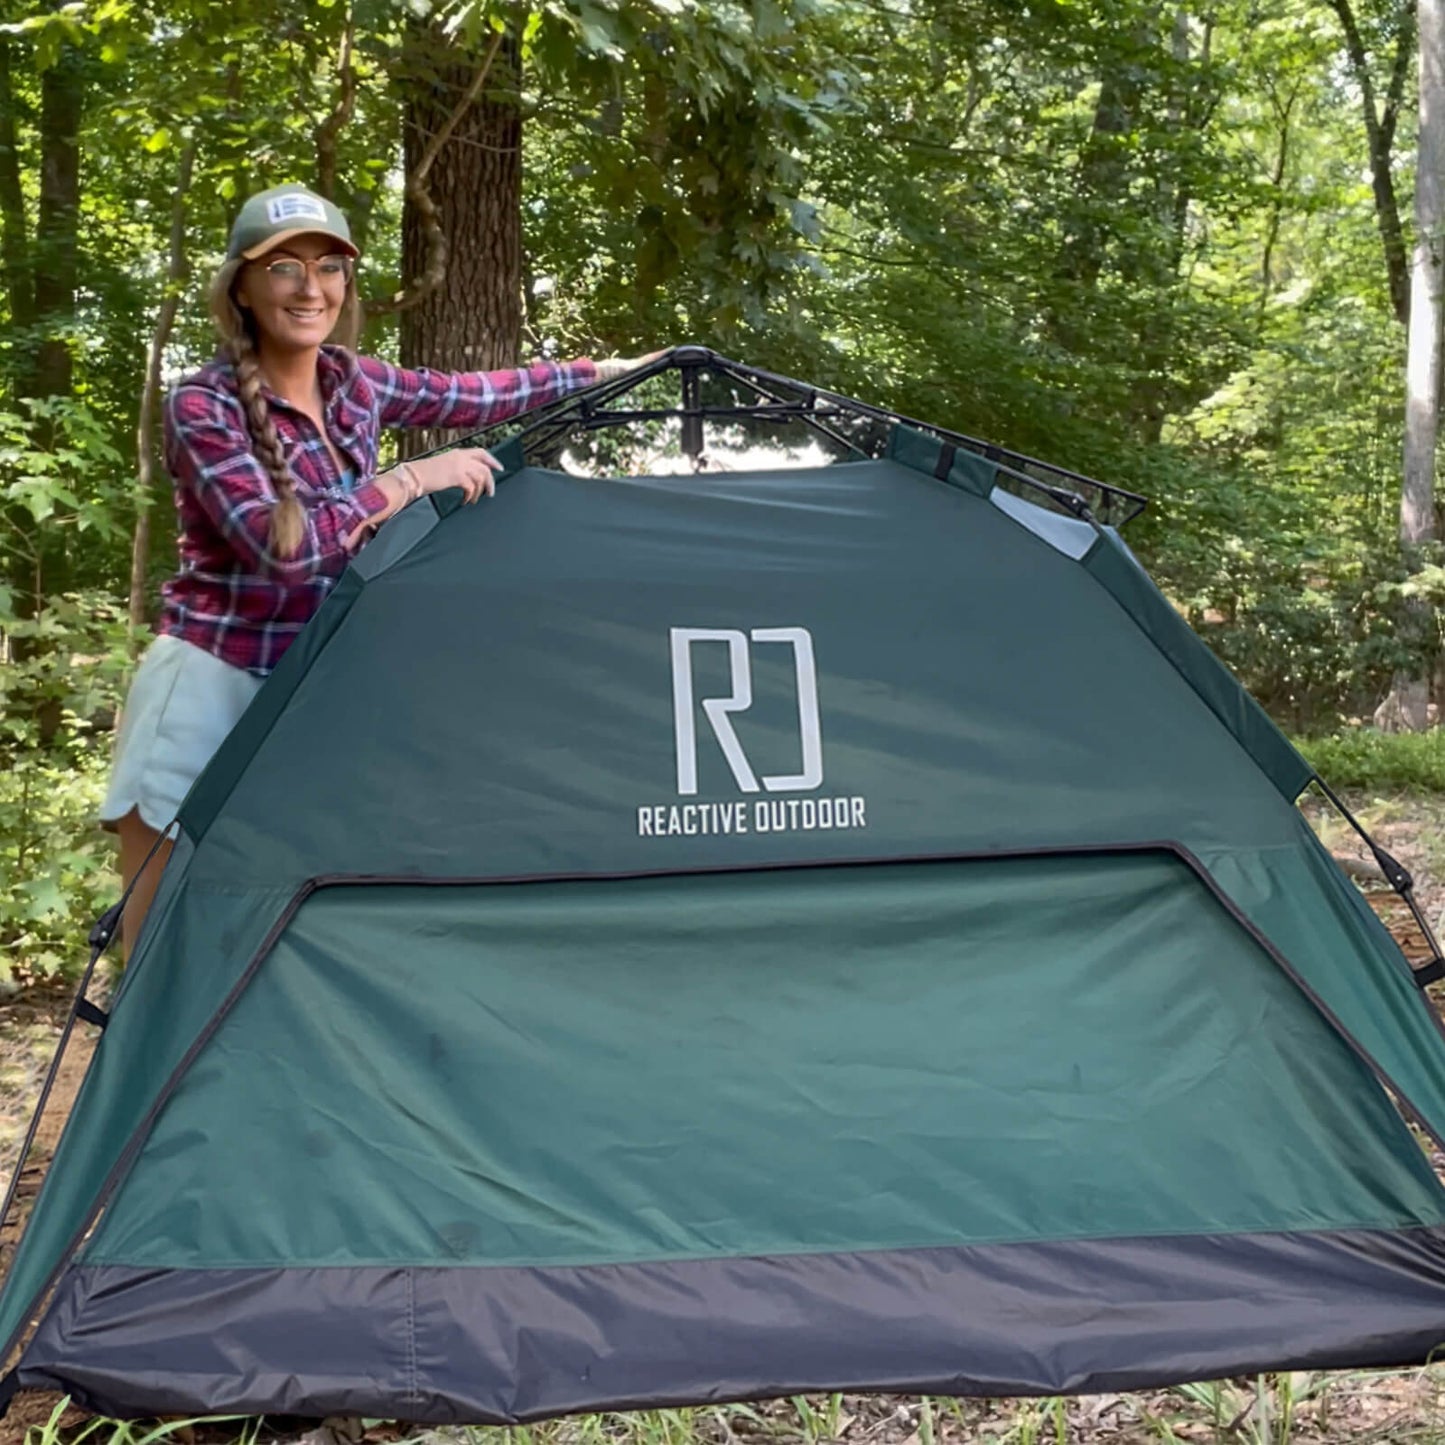 Large-Sized 3 Secs Tent + FREE Camping Tarp (For 2-3 Person, US).